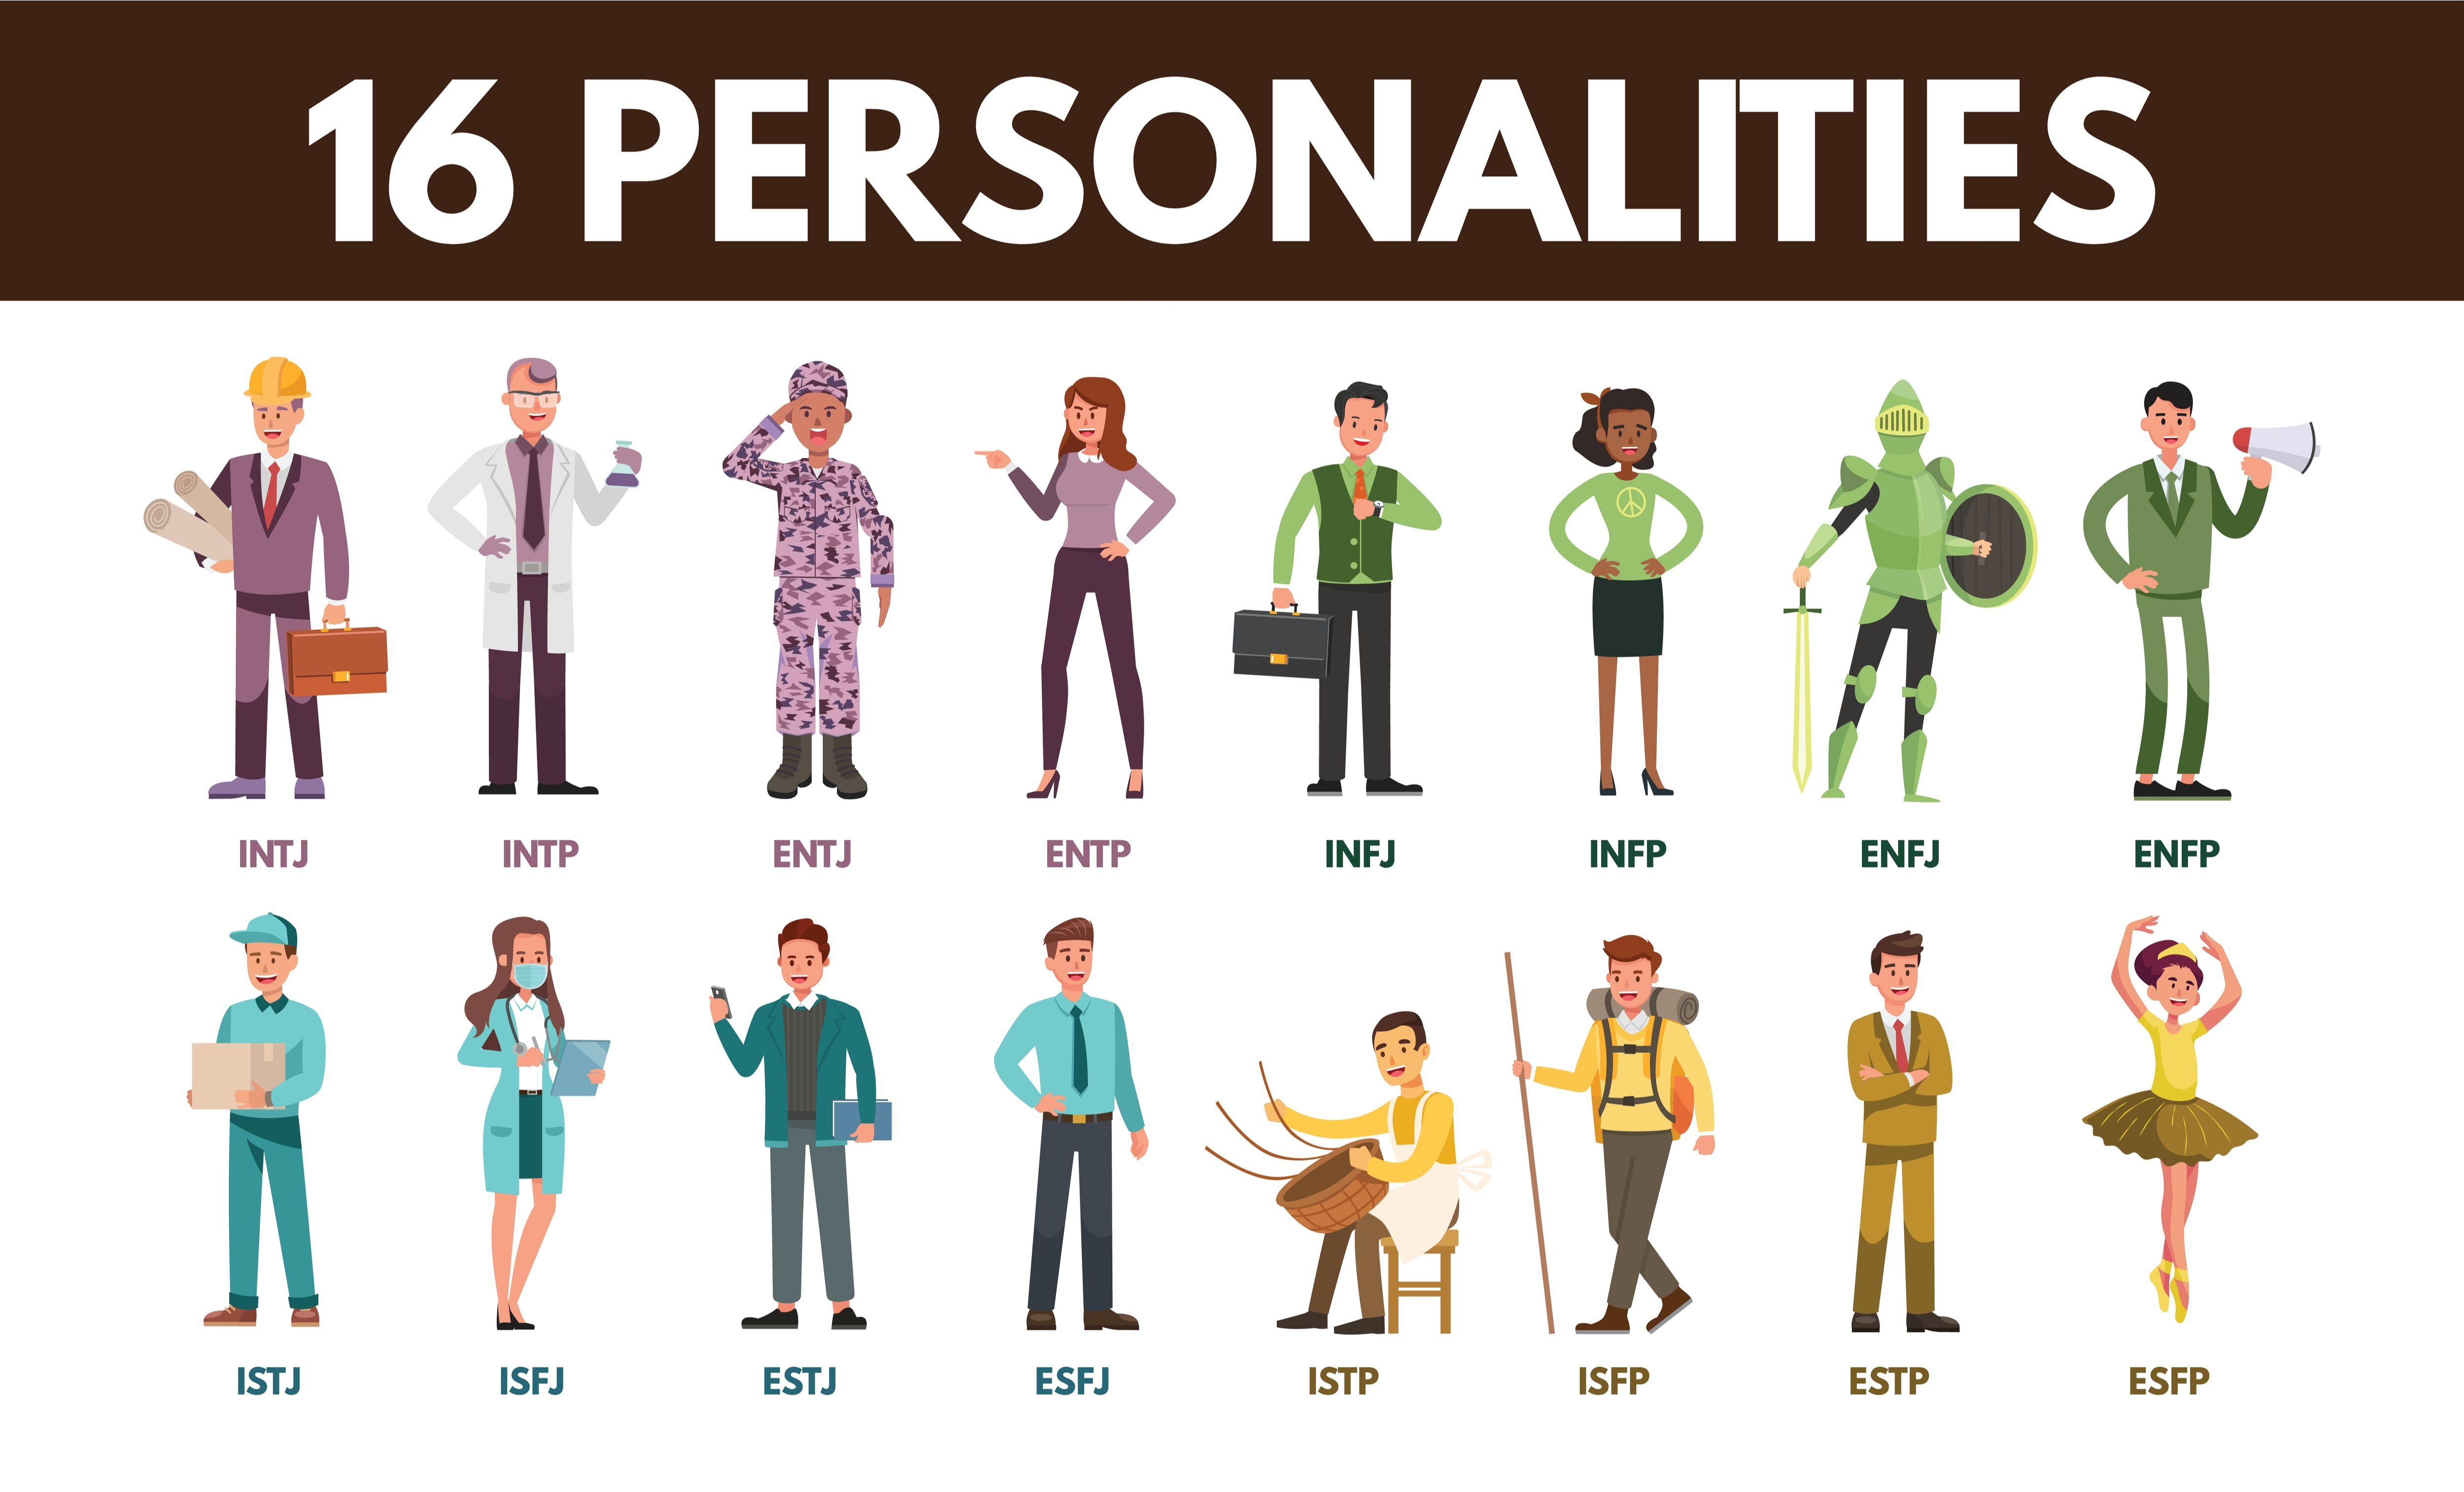 The Problem With the Myers-Briggs Personality Test.